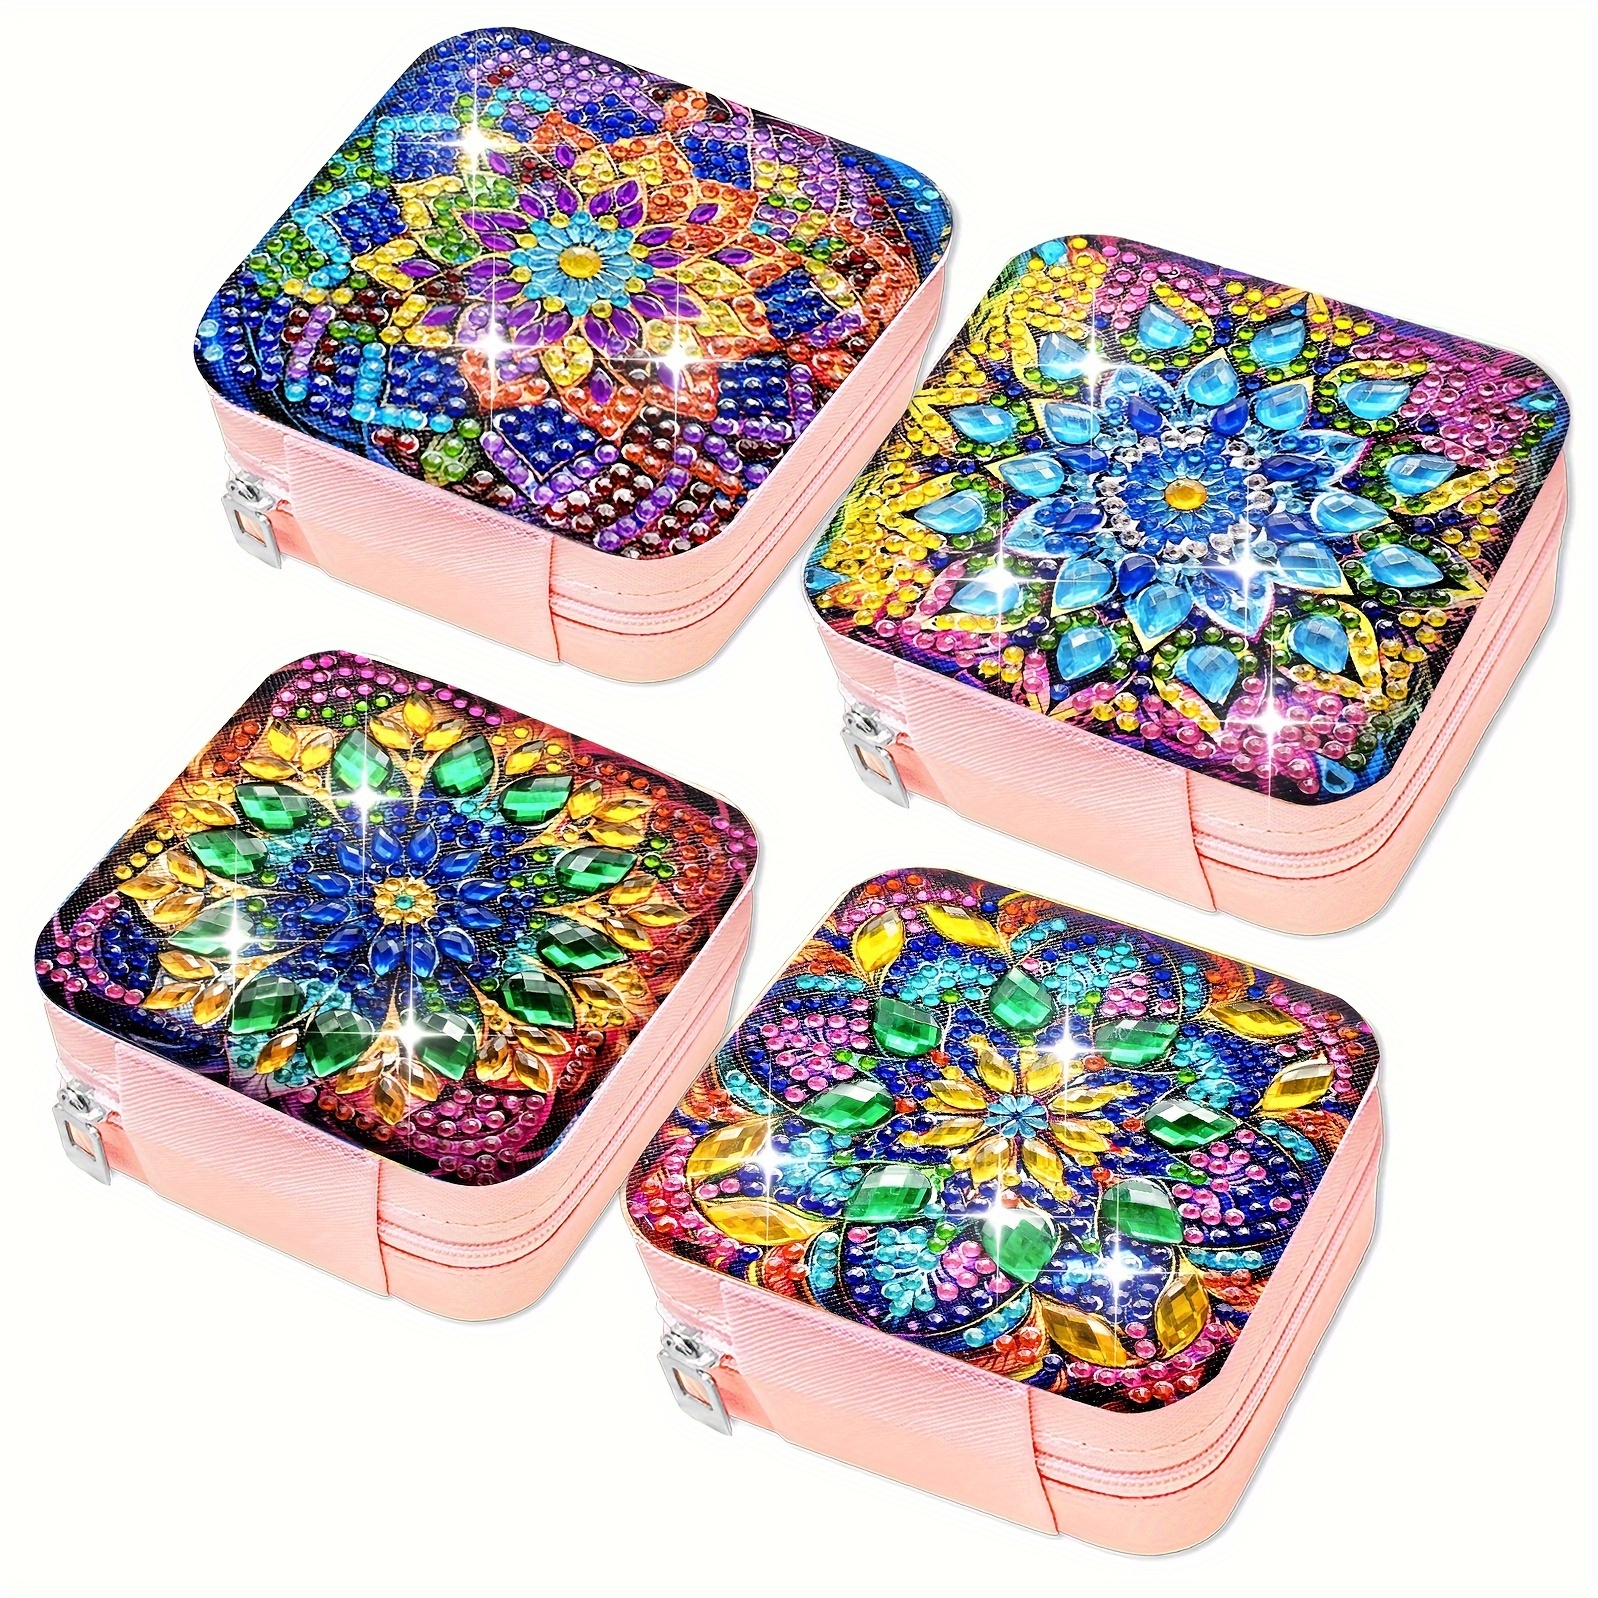 

Diy Mandala Diamond Painting Travel Jewelry Box For Women - Mini Pu Leather Organizer For Rings, Necklaces & More - Purple Floral Design, 2x3.9 Inches